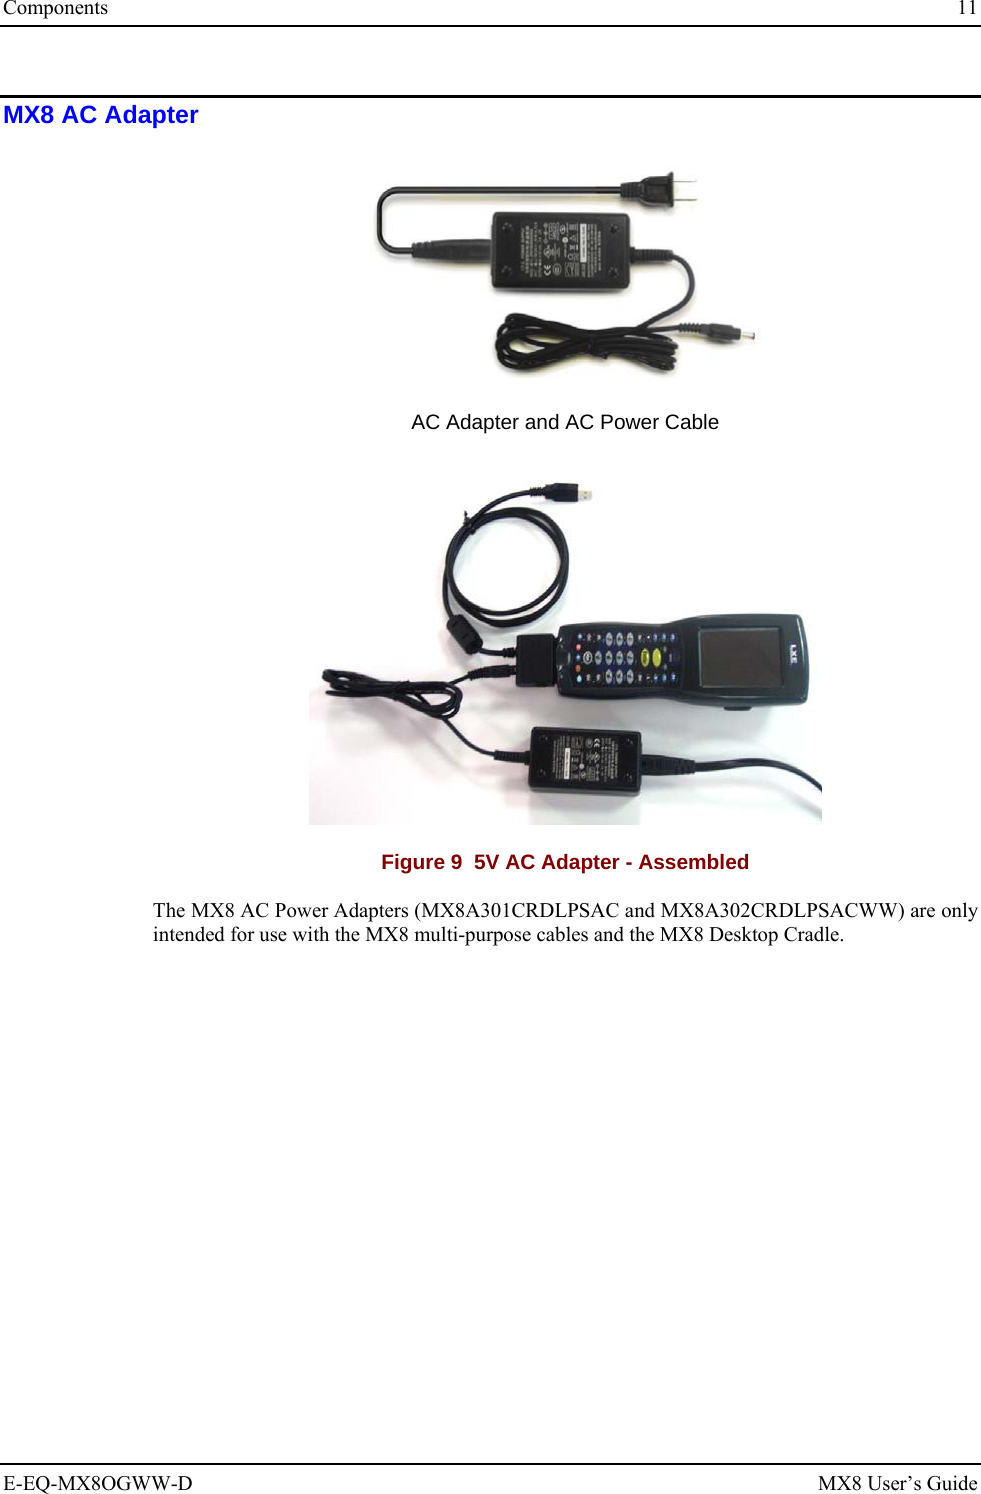 Components  11 E-EQ-MX8OGWW-D MX8 User’s Guide MX8 AC Adapter  AC Adapter and AC Power Cable  Figure 9  5V AC Adapter - Assembled The MX8 AC Power Adapters (MX8A301CRDLPSAC and MX8A302CRDLPSACWW) are only intended for use with the MX8 multi-purpose cables and the MX8 Desktop Cradle. 